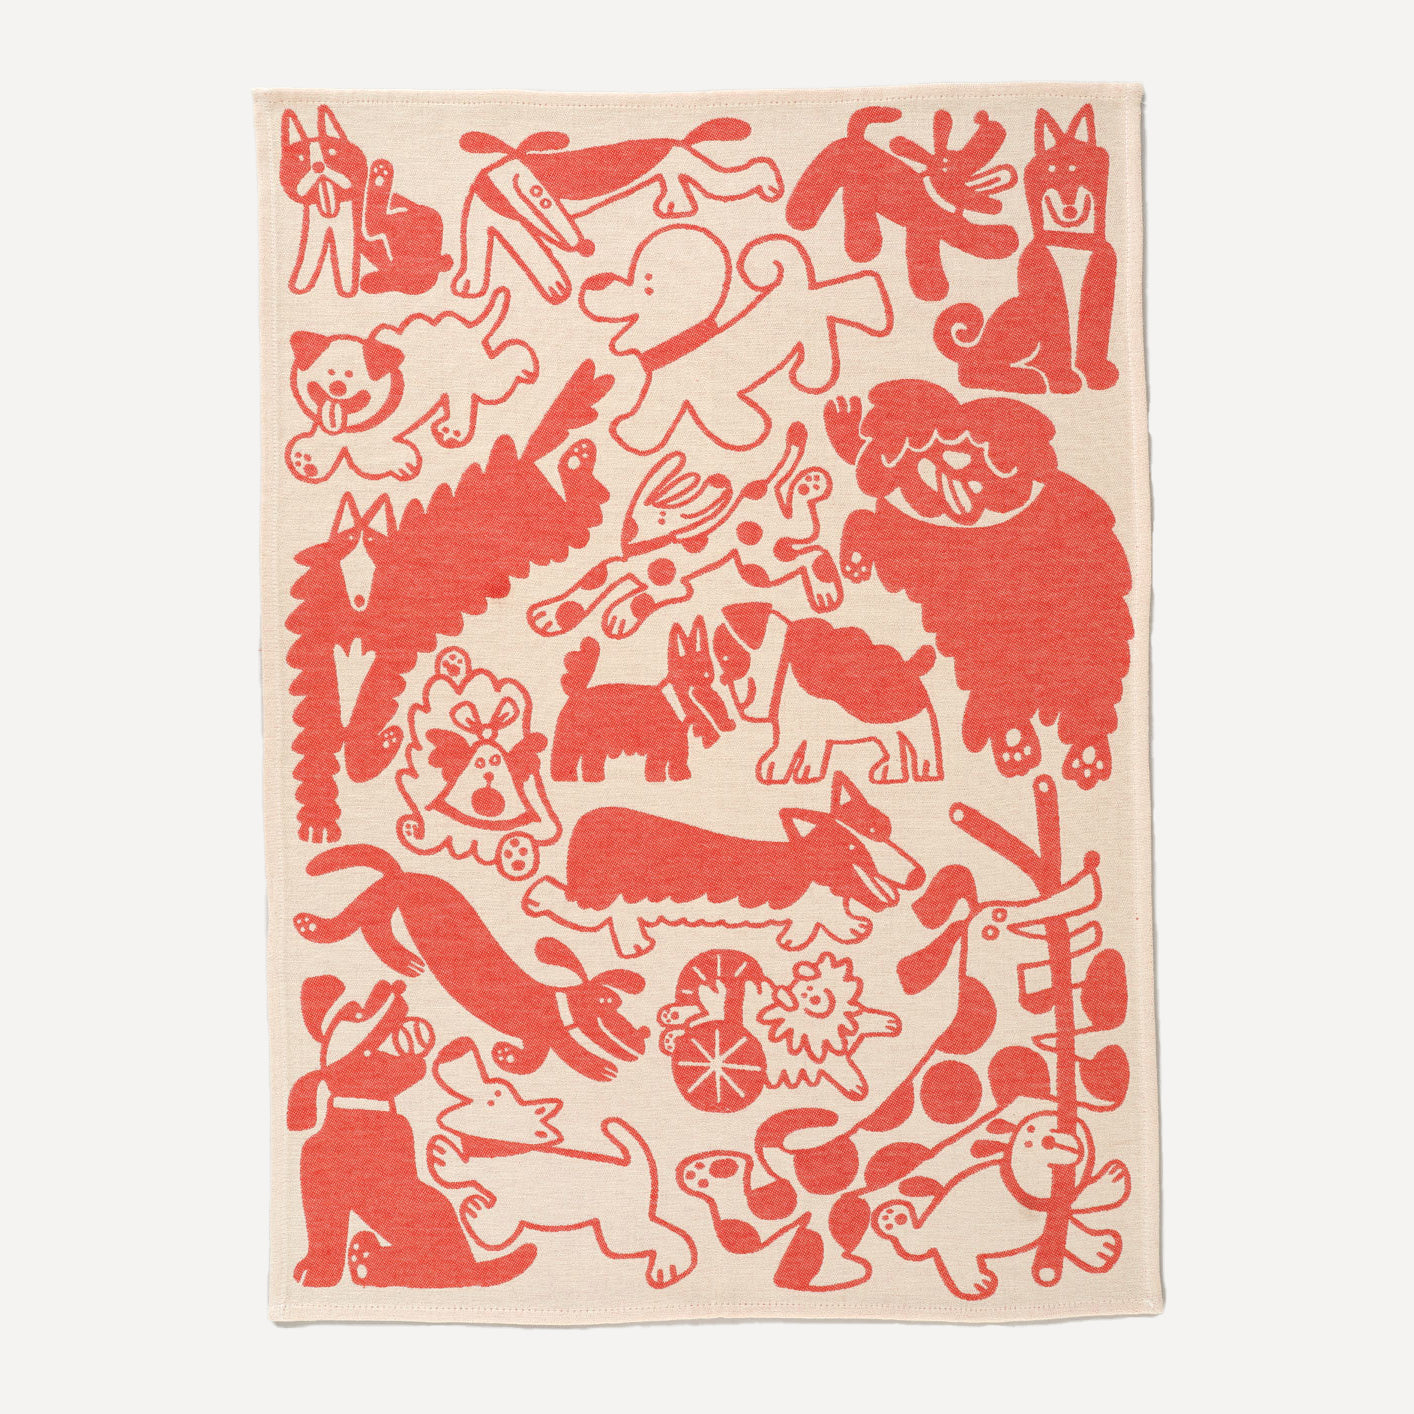 Orange and white cat illustrated tea towel by Cari Vander Yacht for Wrap Magazine